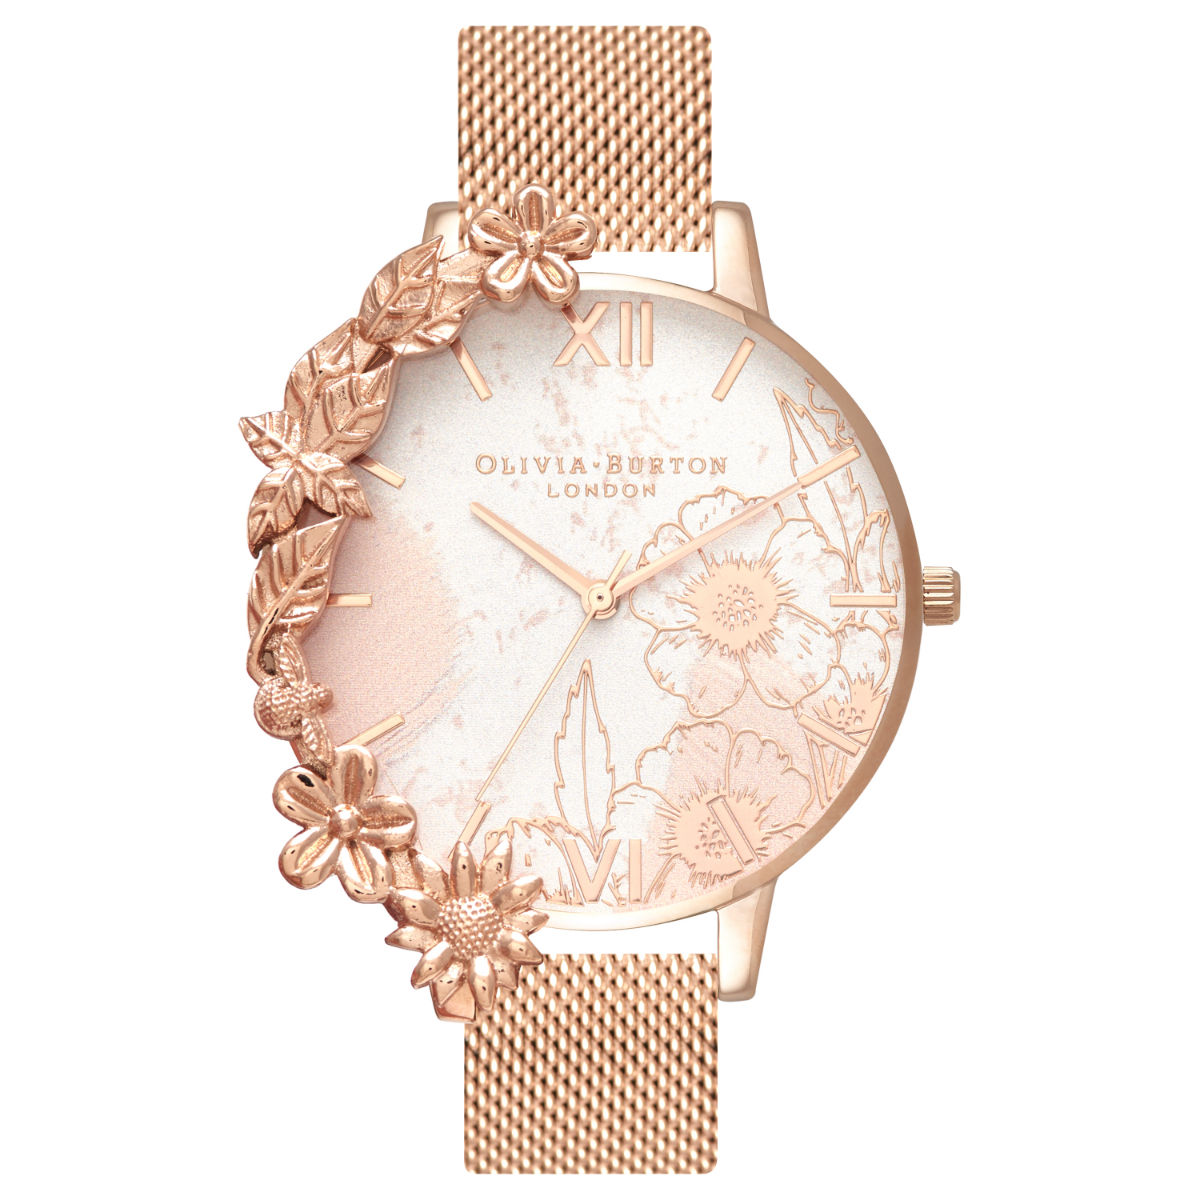 Olivia Burton reaches for the stars with its SS20 Celestial watches